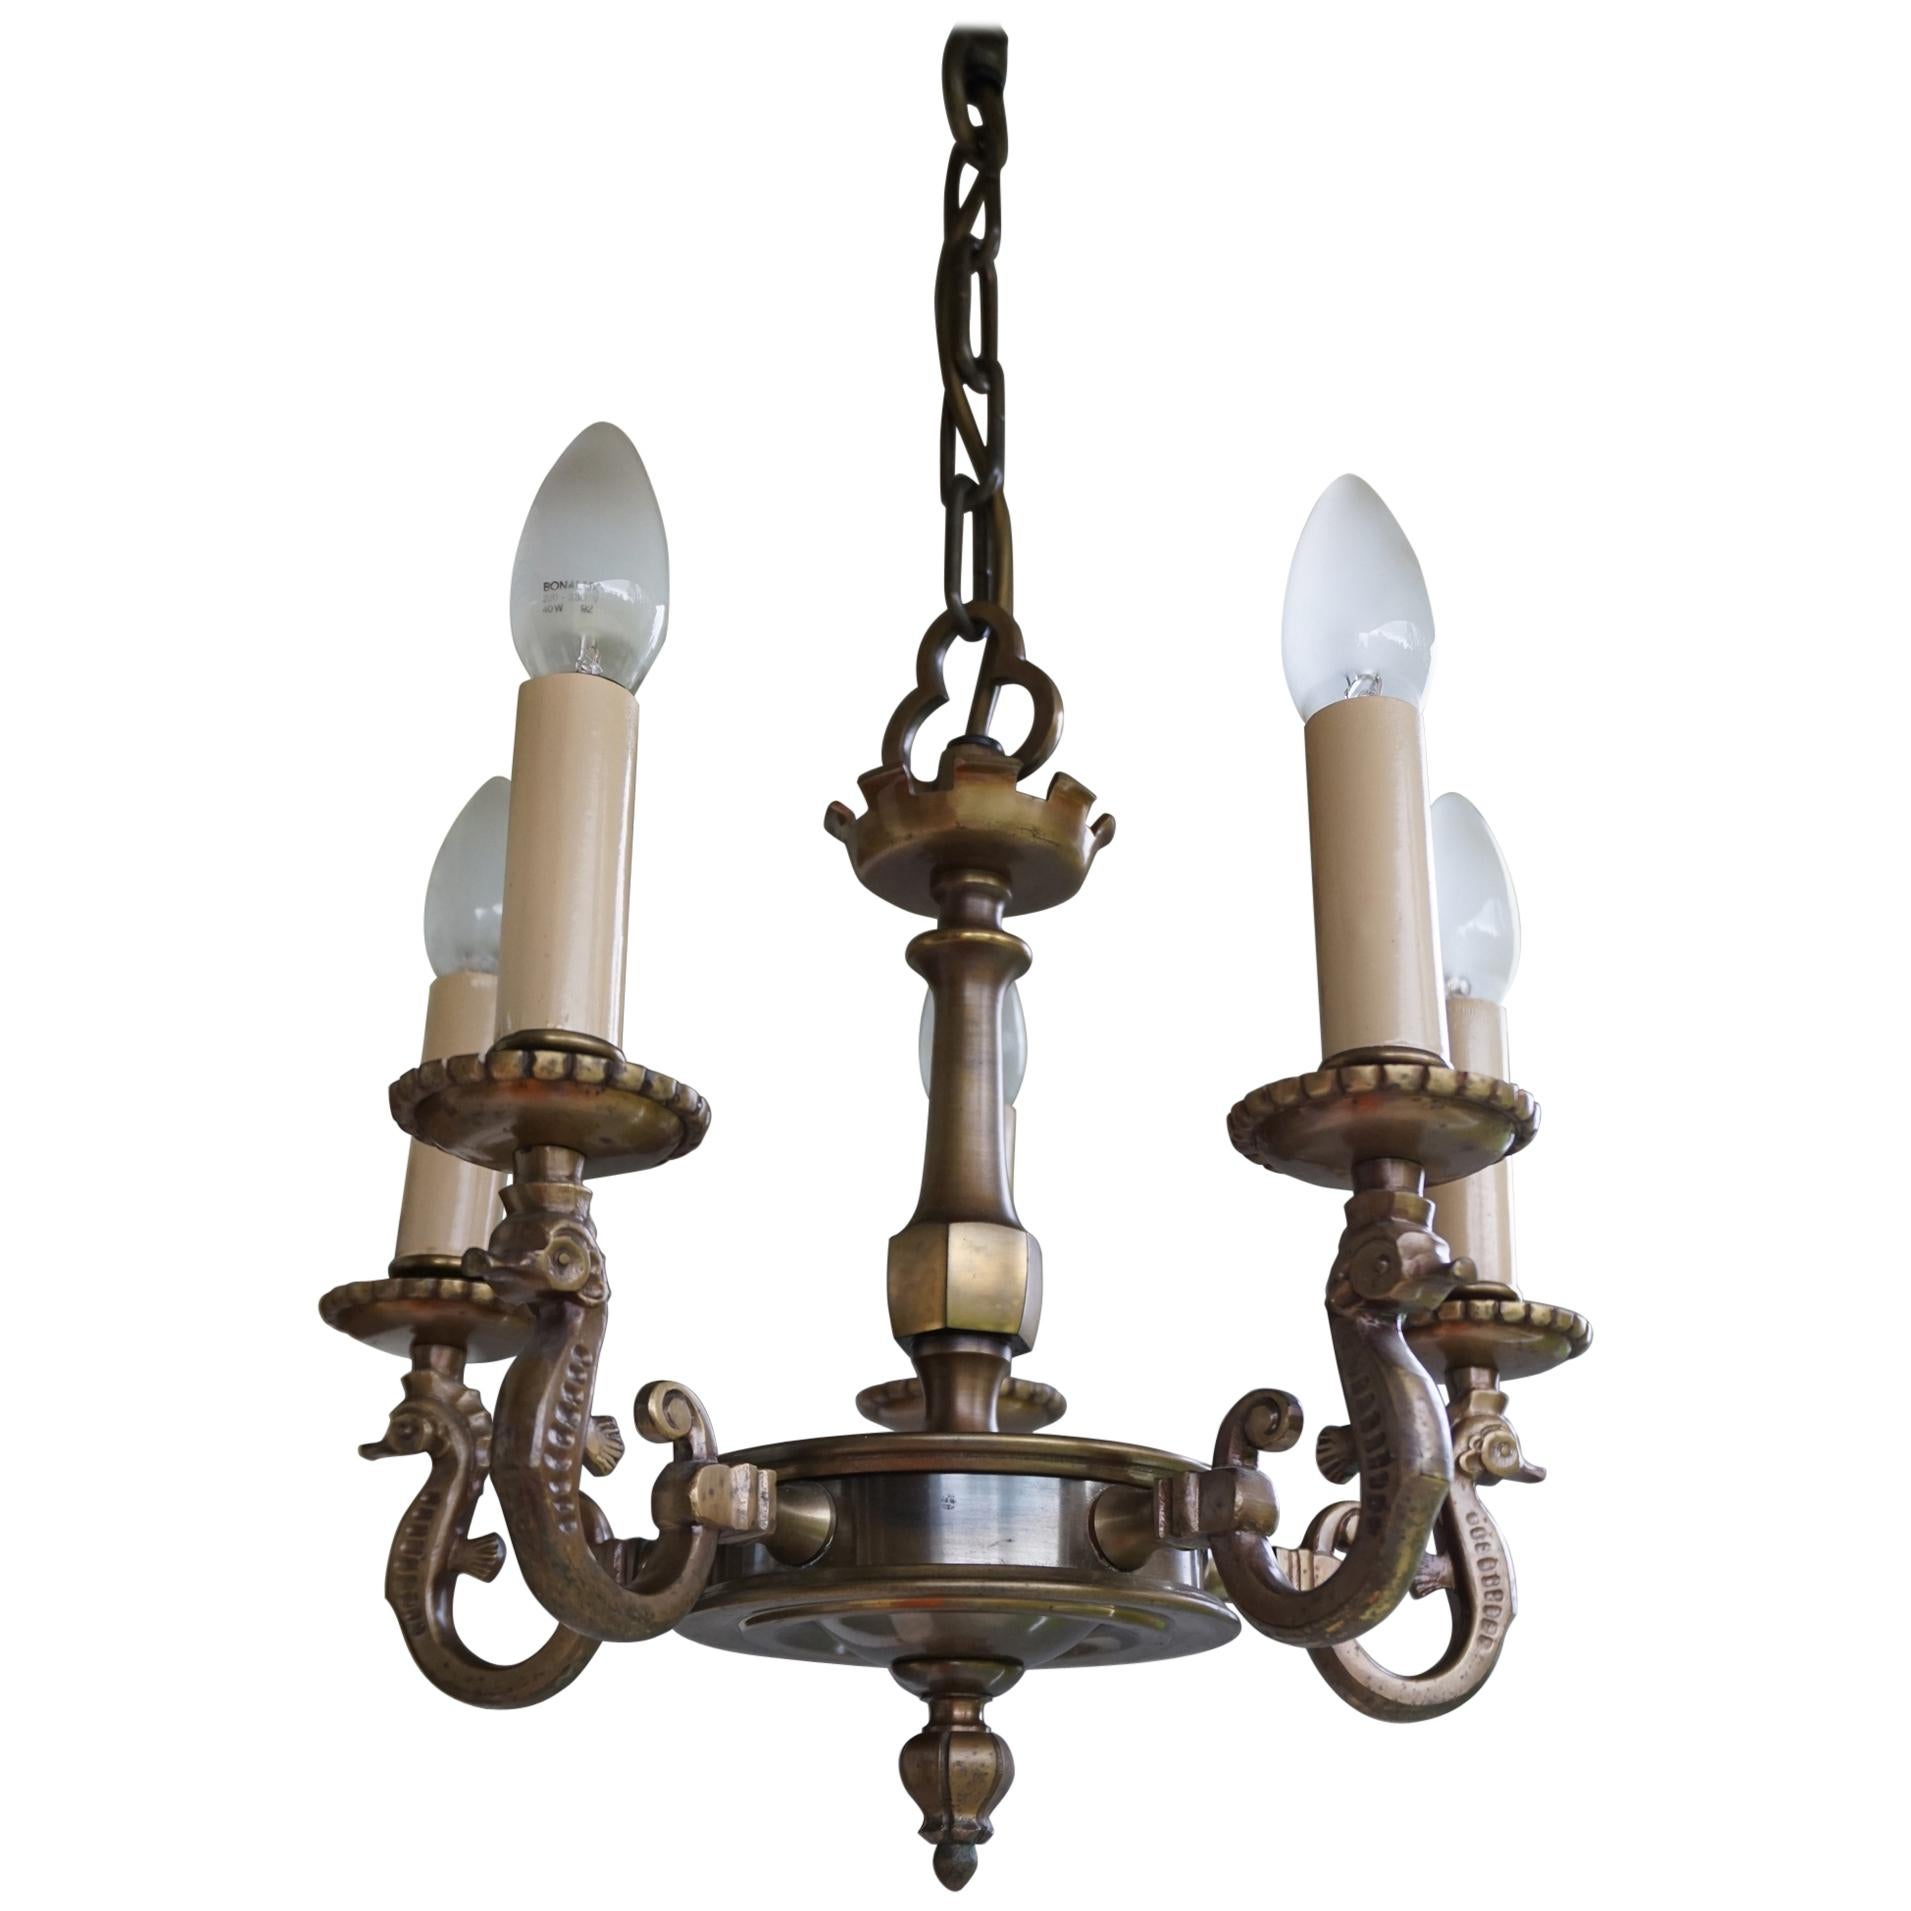 Small Semi 5-Light Pendant with Bronze Seahorse Sculptures and Gothic Stem